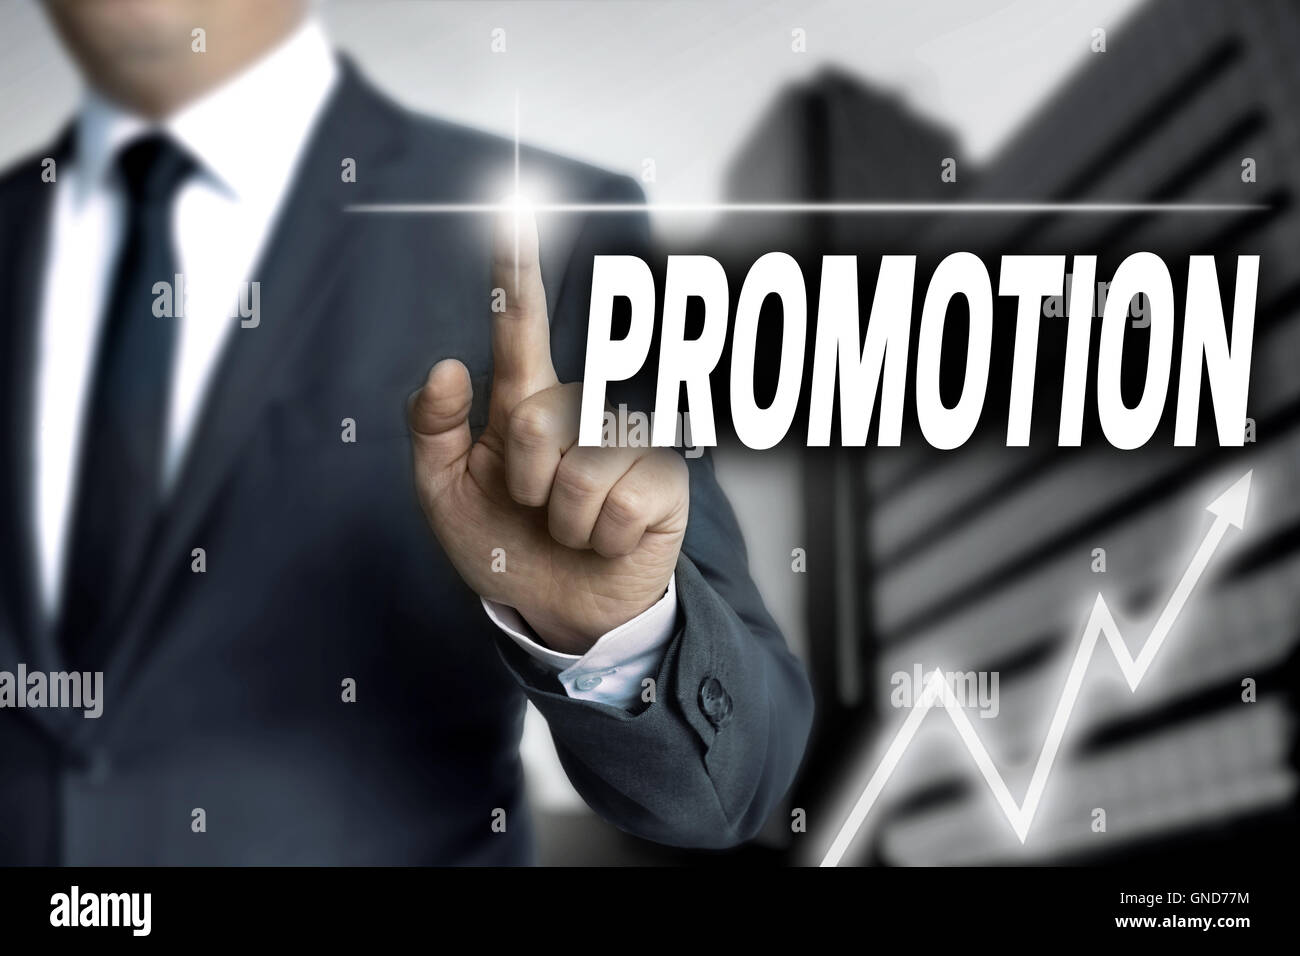 Promotion touchscreen is operated by businessman. Stock Photo